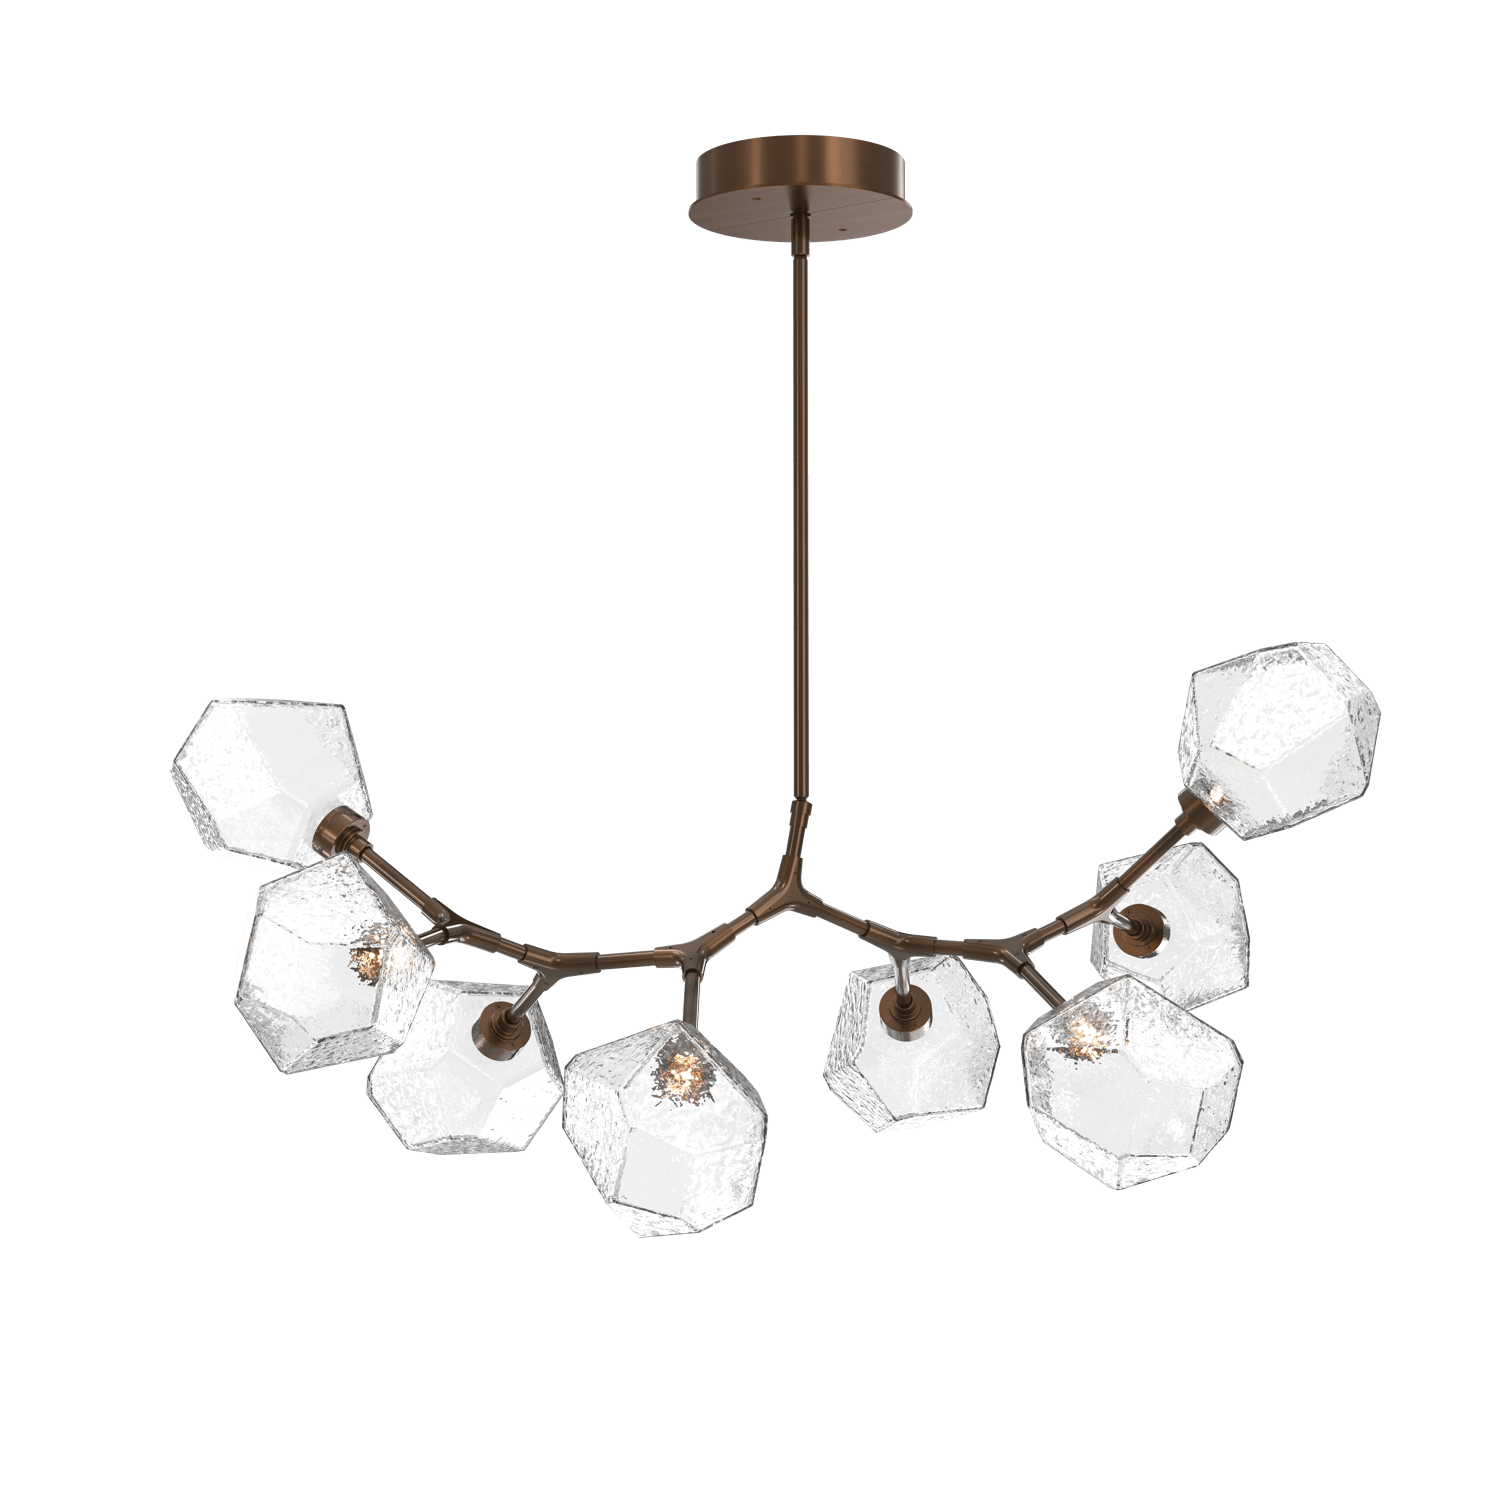 PLB0039-BB-RB-S-Hammerton-Studio-Gem-8-light-modern-branch-chandelier-with-oil-rubbed-bronze-finish-and-smoke-blown-glass-shades-and-LED-lamping